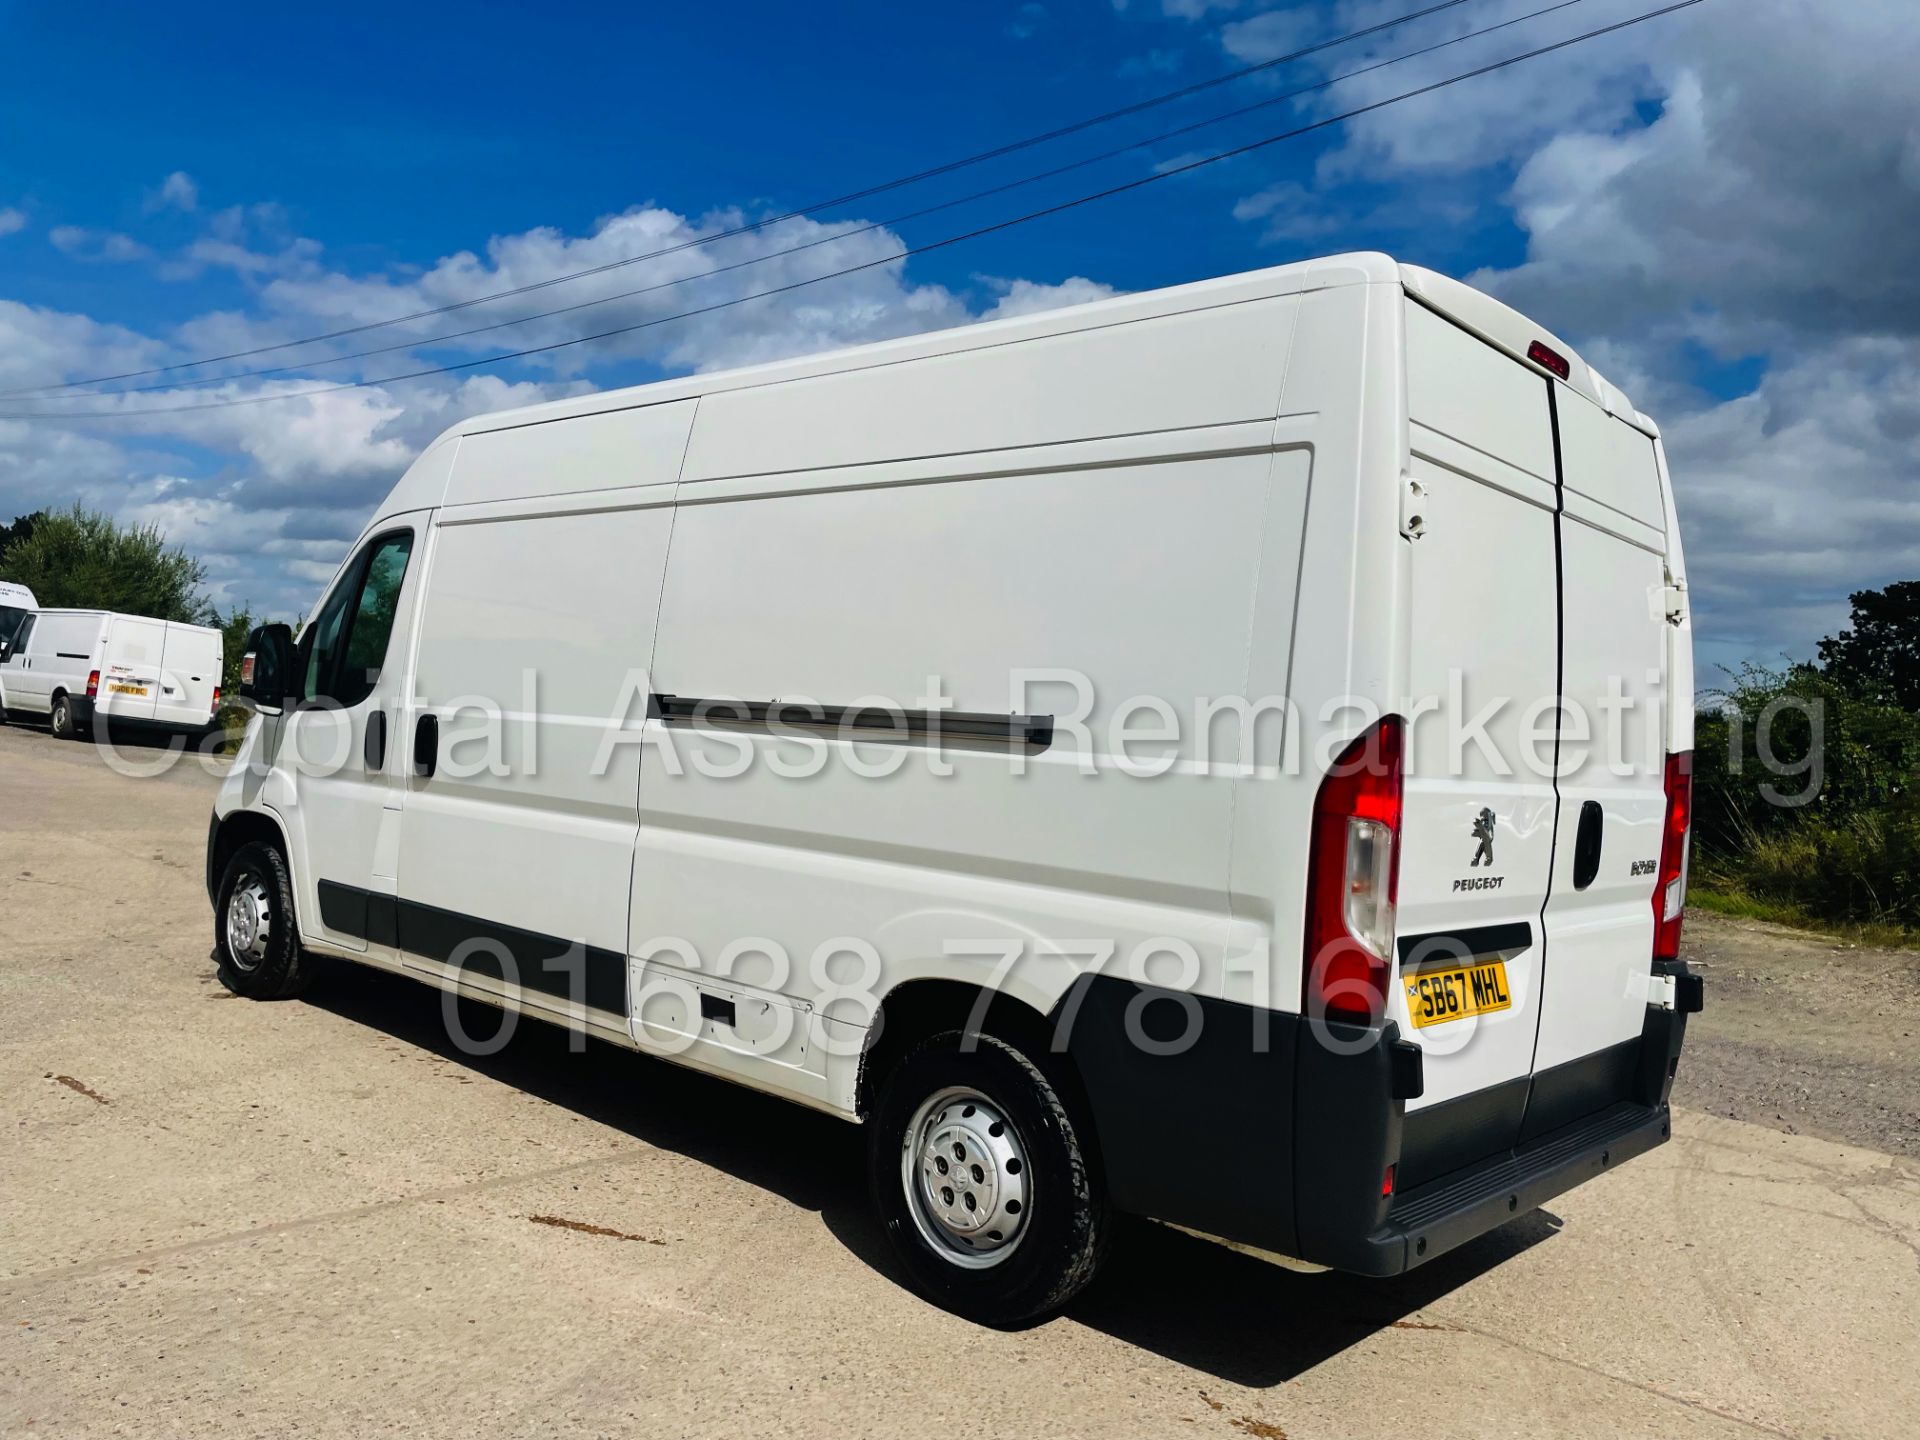 ON SALE PEUGEOT BOXER *PROFESSIONAL* LWB HI-ROOF (2018 - EURO 6) '2.0 BLUE HDI - 6 SPEED' *A/C & NAV - Image 10 of 44